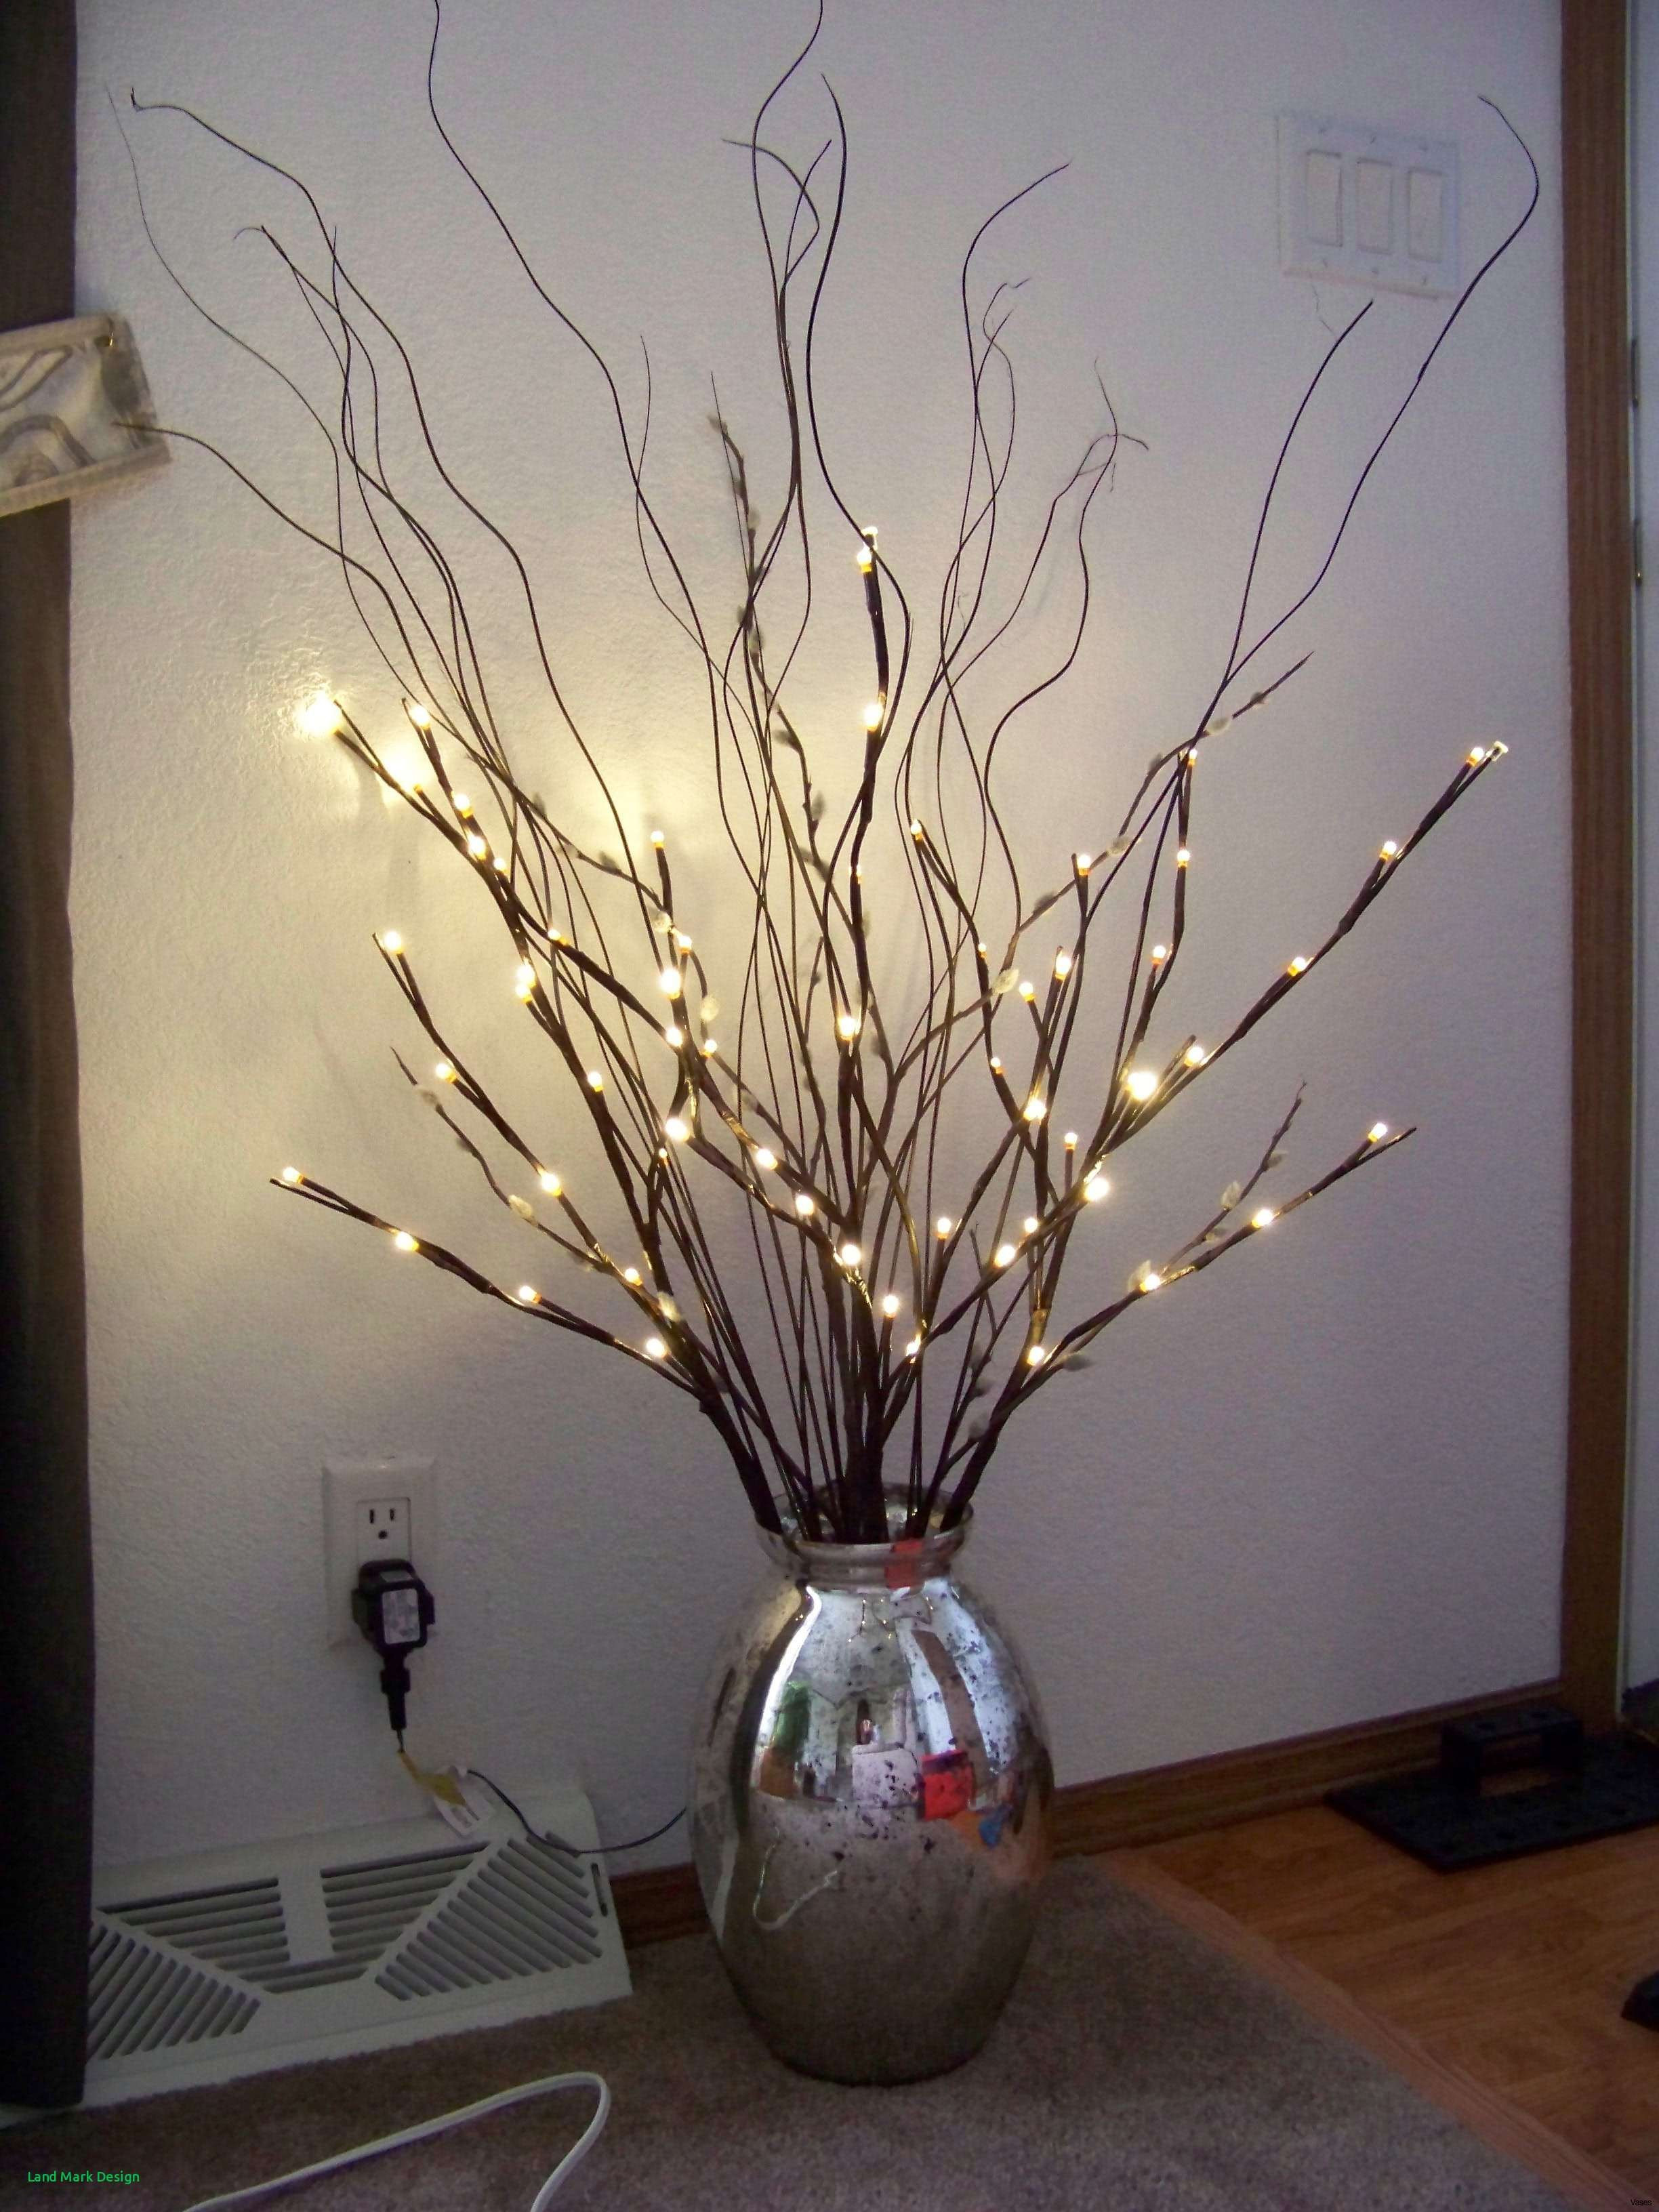 30 Cute Living Room Vase with Sticks 2024 free download living room vase with sticks of tall vase with sticks elegant branches for vases ikea interior inside tall vase with sticks elegant branches for vases ikea interior design best pe s5h vases